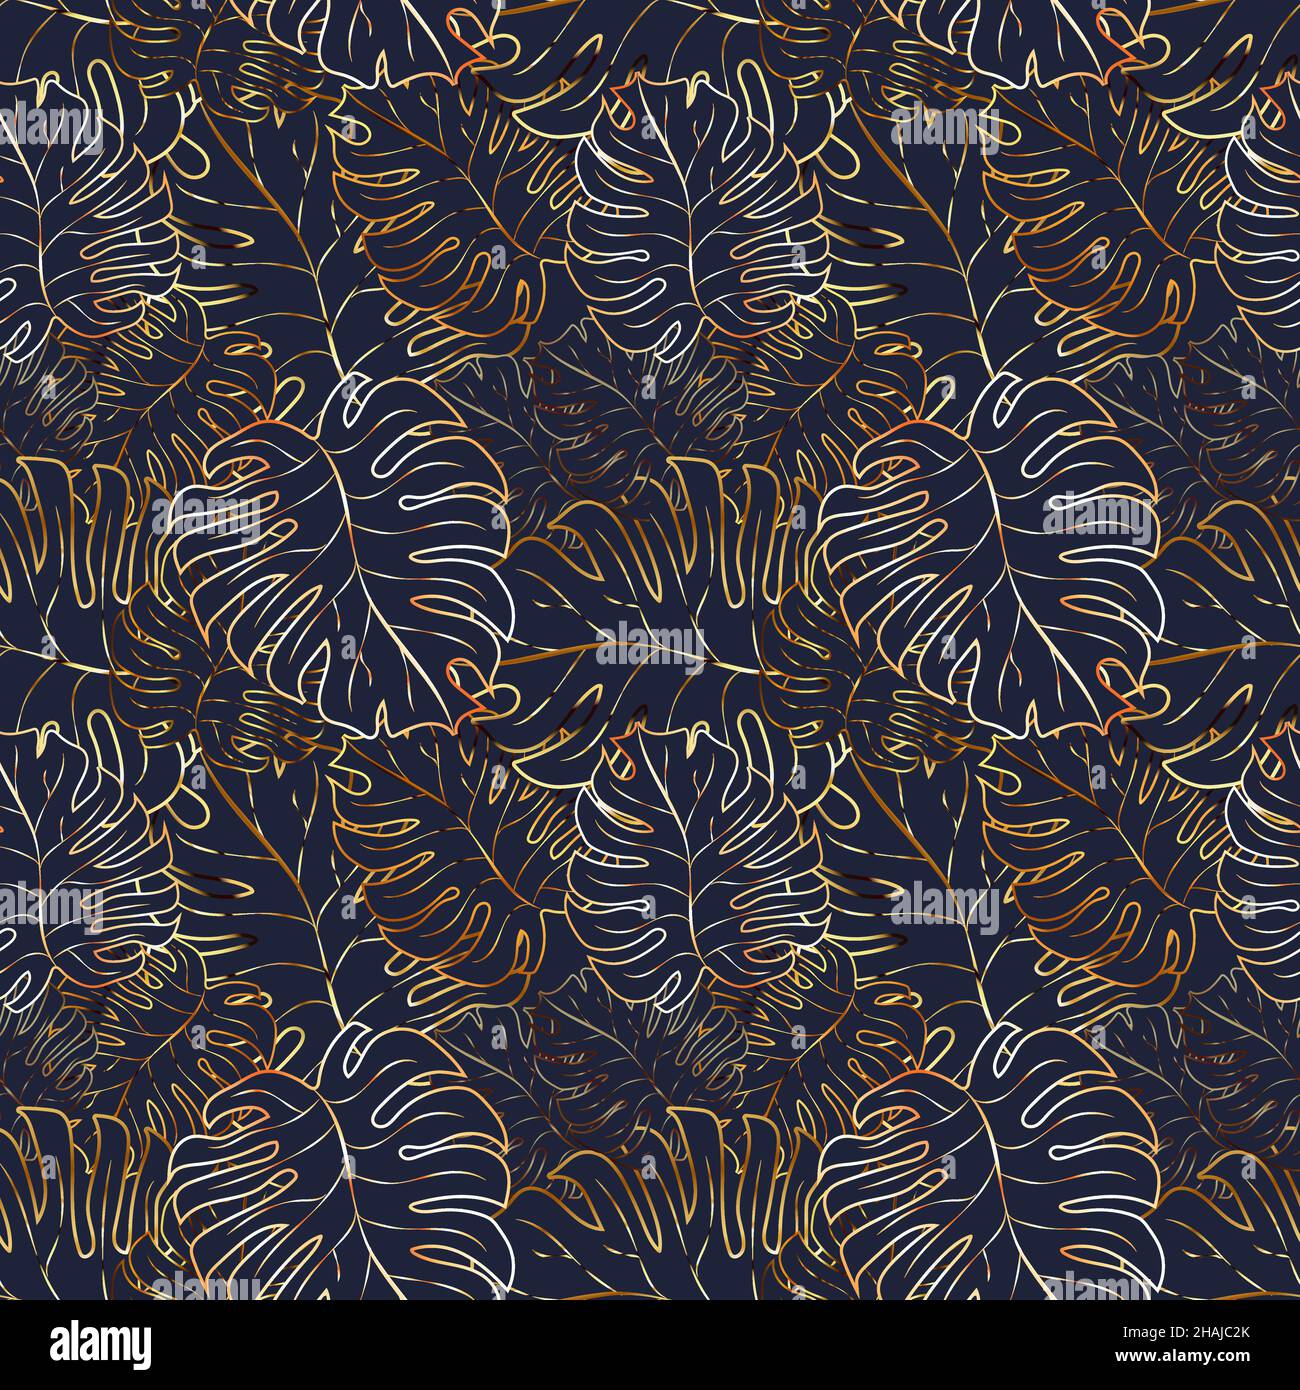 Lot of cute palm leaves with golden outline, modern fashion seamless pattern texture. Exotic tropical jungle forest fabric textile. Stock Vector